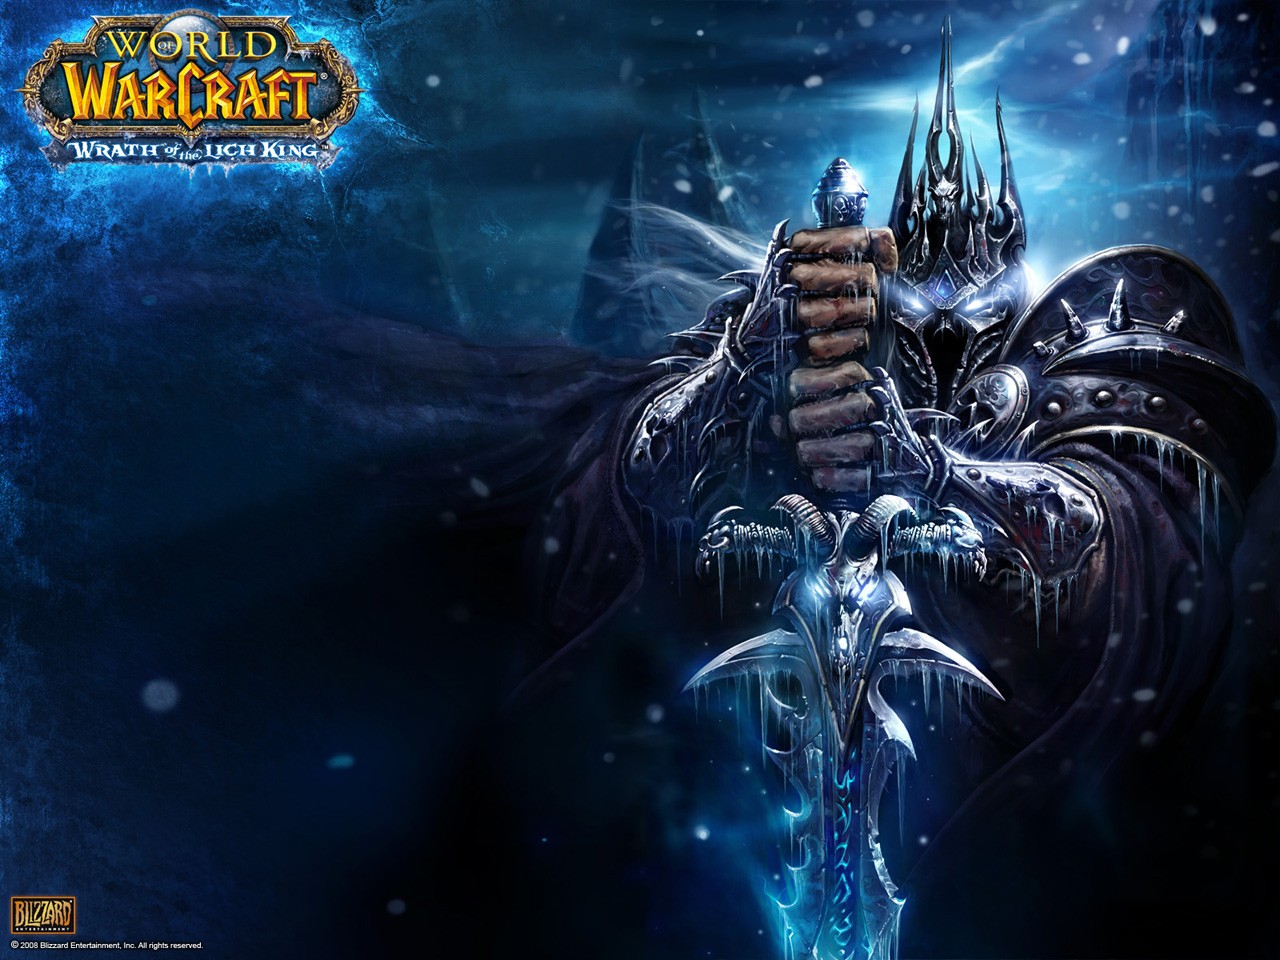 General 1280x960 World of Warcraft Lich King video games World of Warcraft: Wrath of the Lich King Blizzard Entertainment 2008 (Year) PC gaming fantasy art